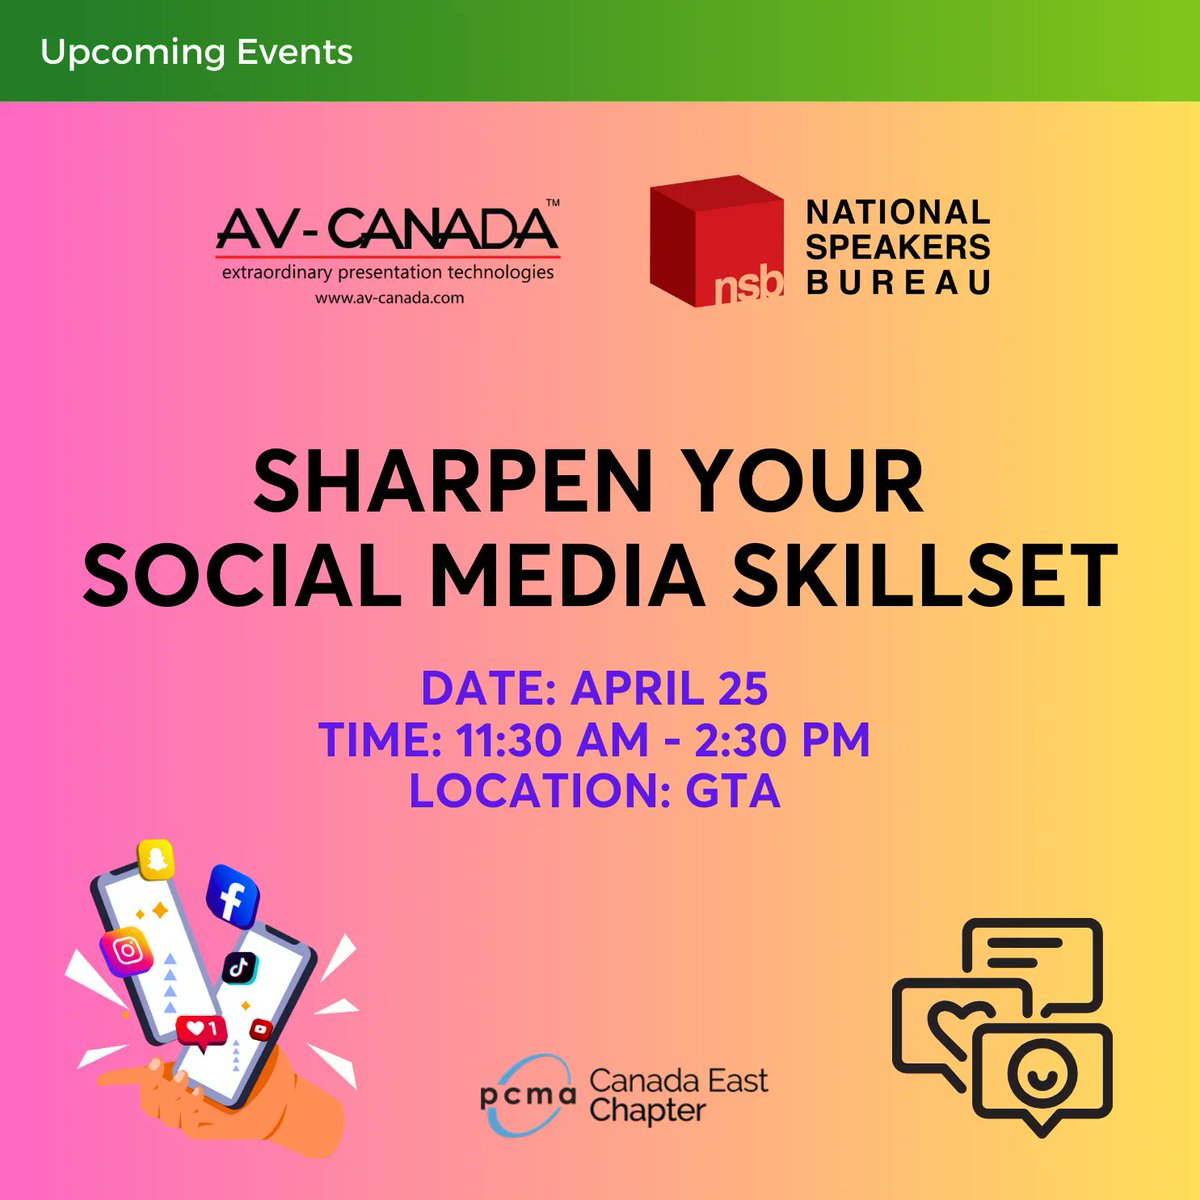 Join us for PCMA CE’s next Lunch ‘n’ Learn event and kick your social media skills up a notch! Date: April 25, 2023 Time: 11:30am – 2:30pm Location: GTA Registration & more info 👉 buff.ly/3Zm96bV #pcmace #pcma #eventprofs #meetingprofs